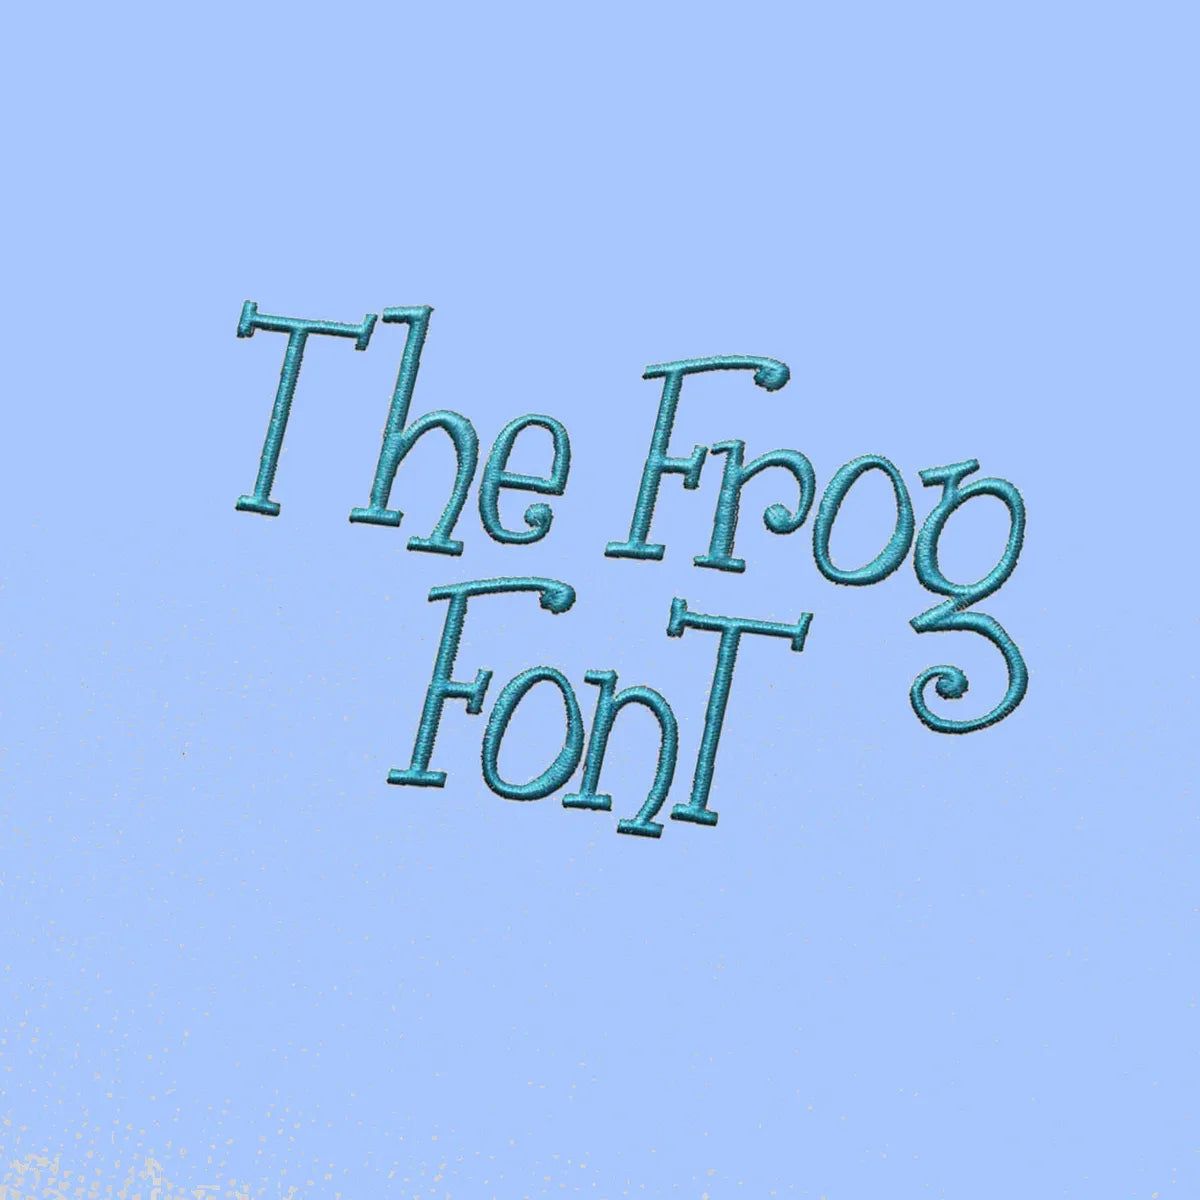 The frog Embroidery alphabet Font Set - FineryEmbroidery